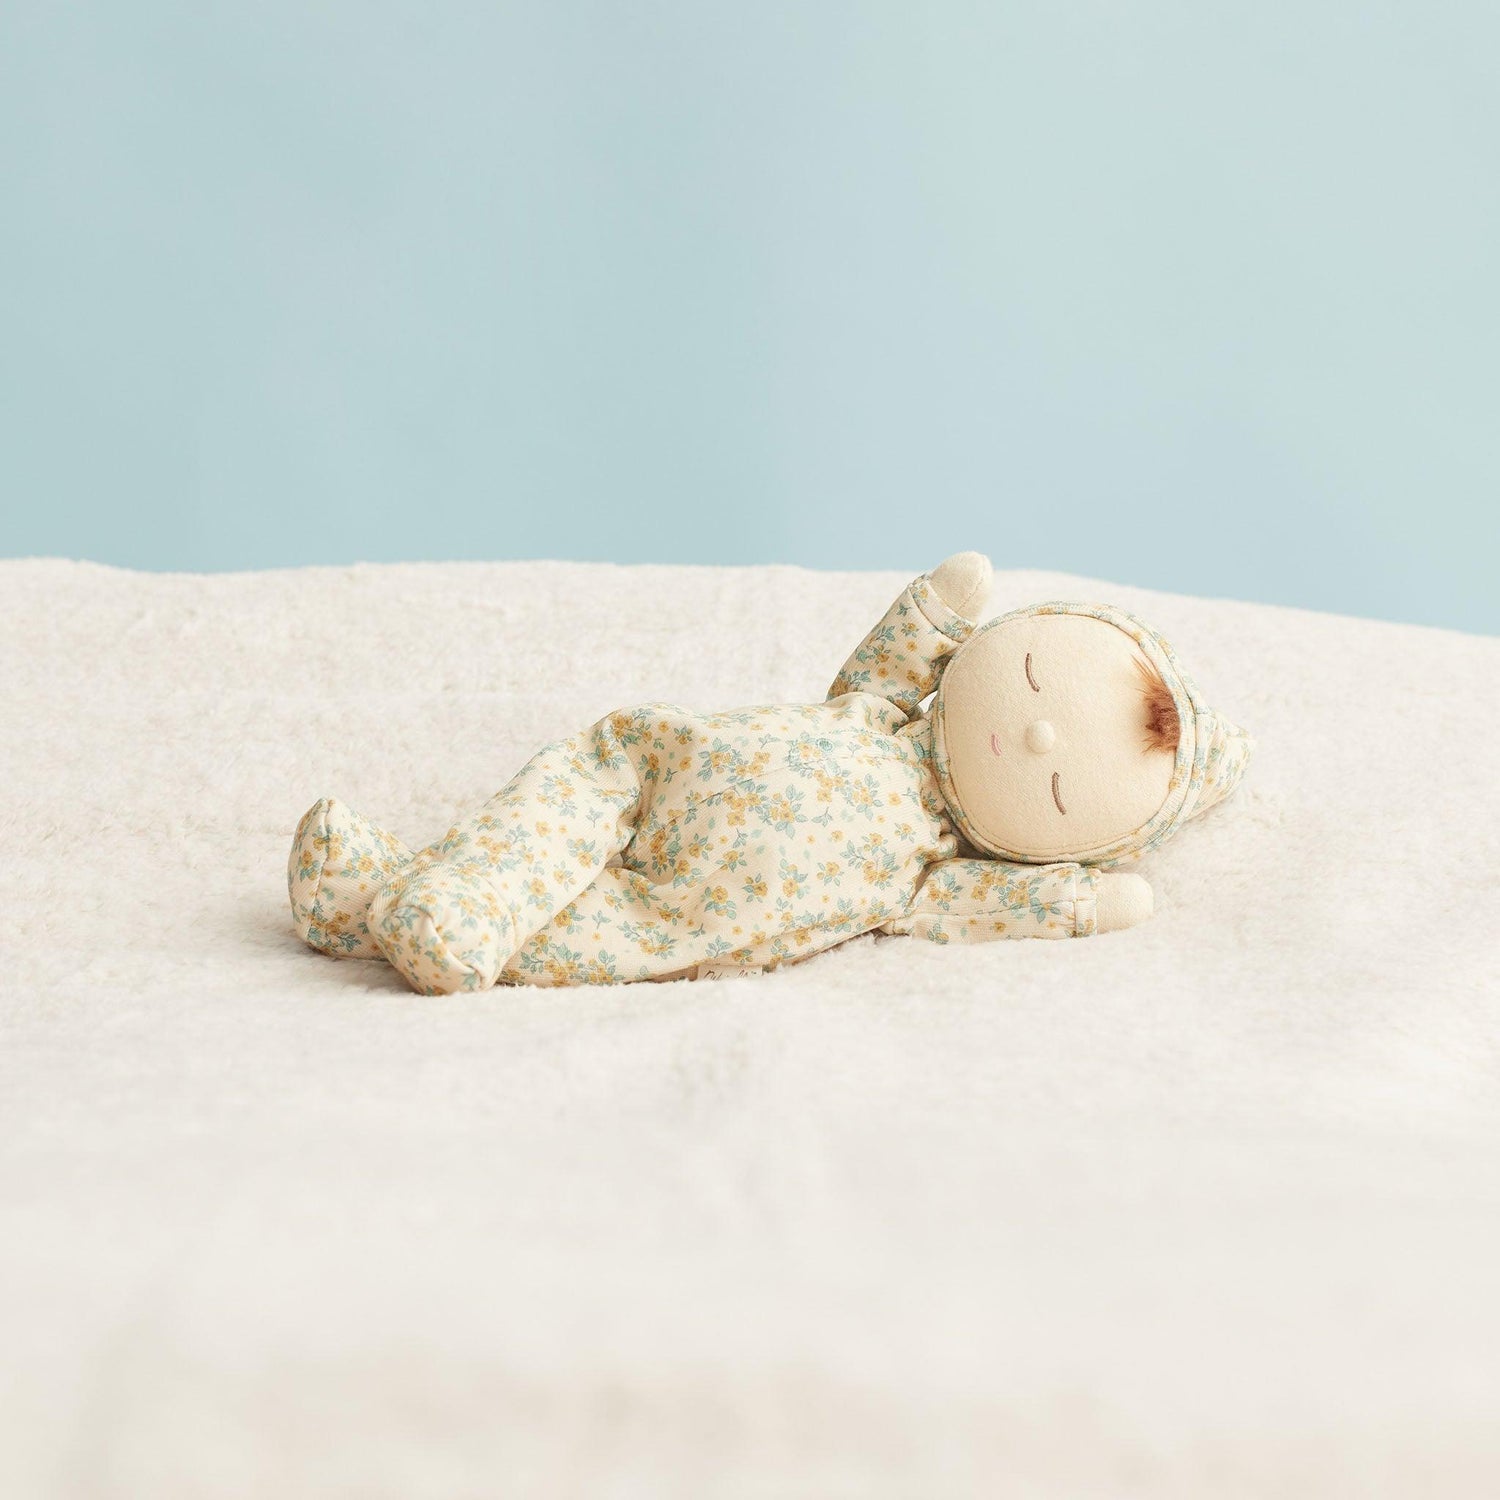 Puppe Dozy Dinkum 'Pickle Blossom' - The Little One • Family.Concept.Store. 